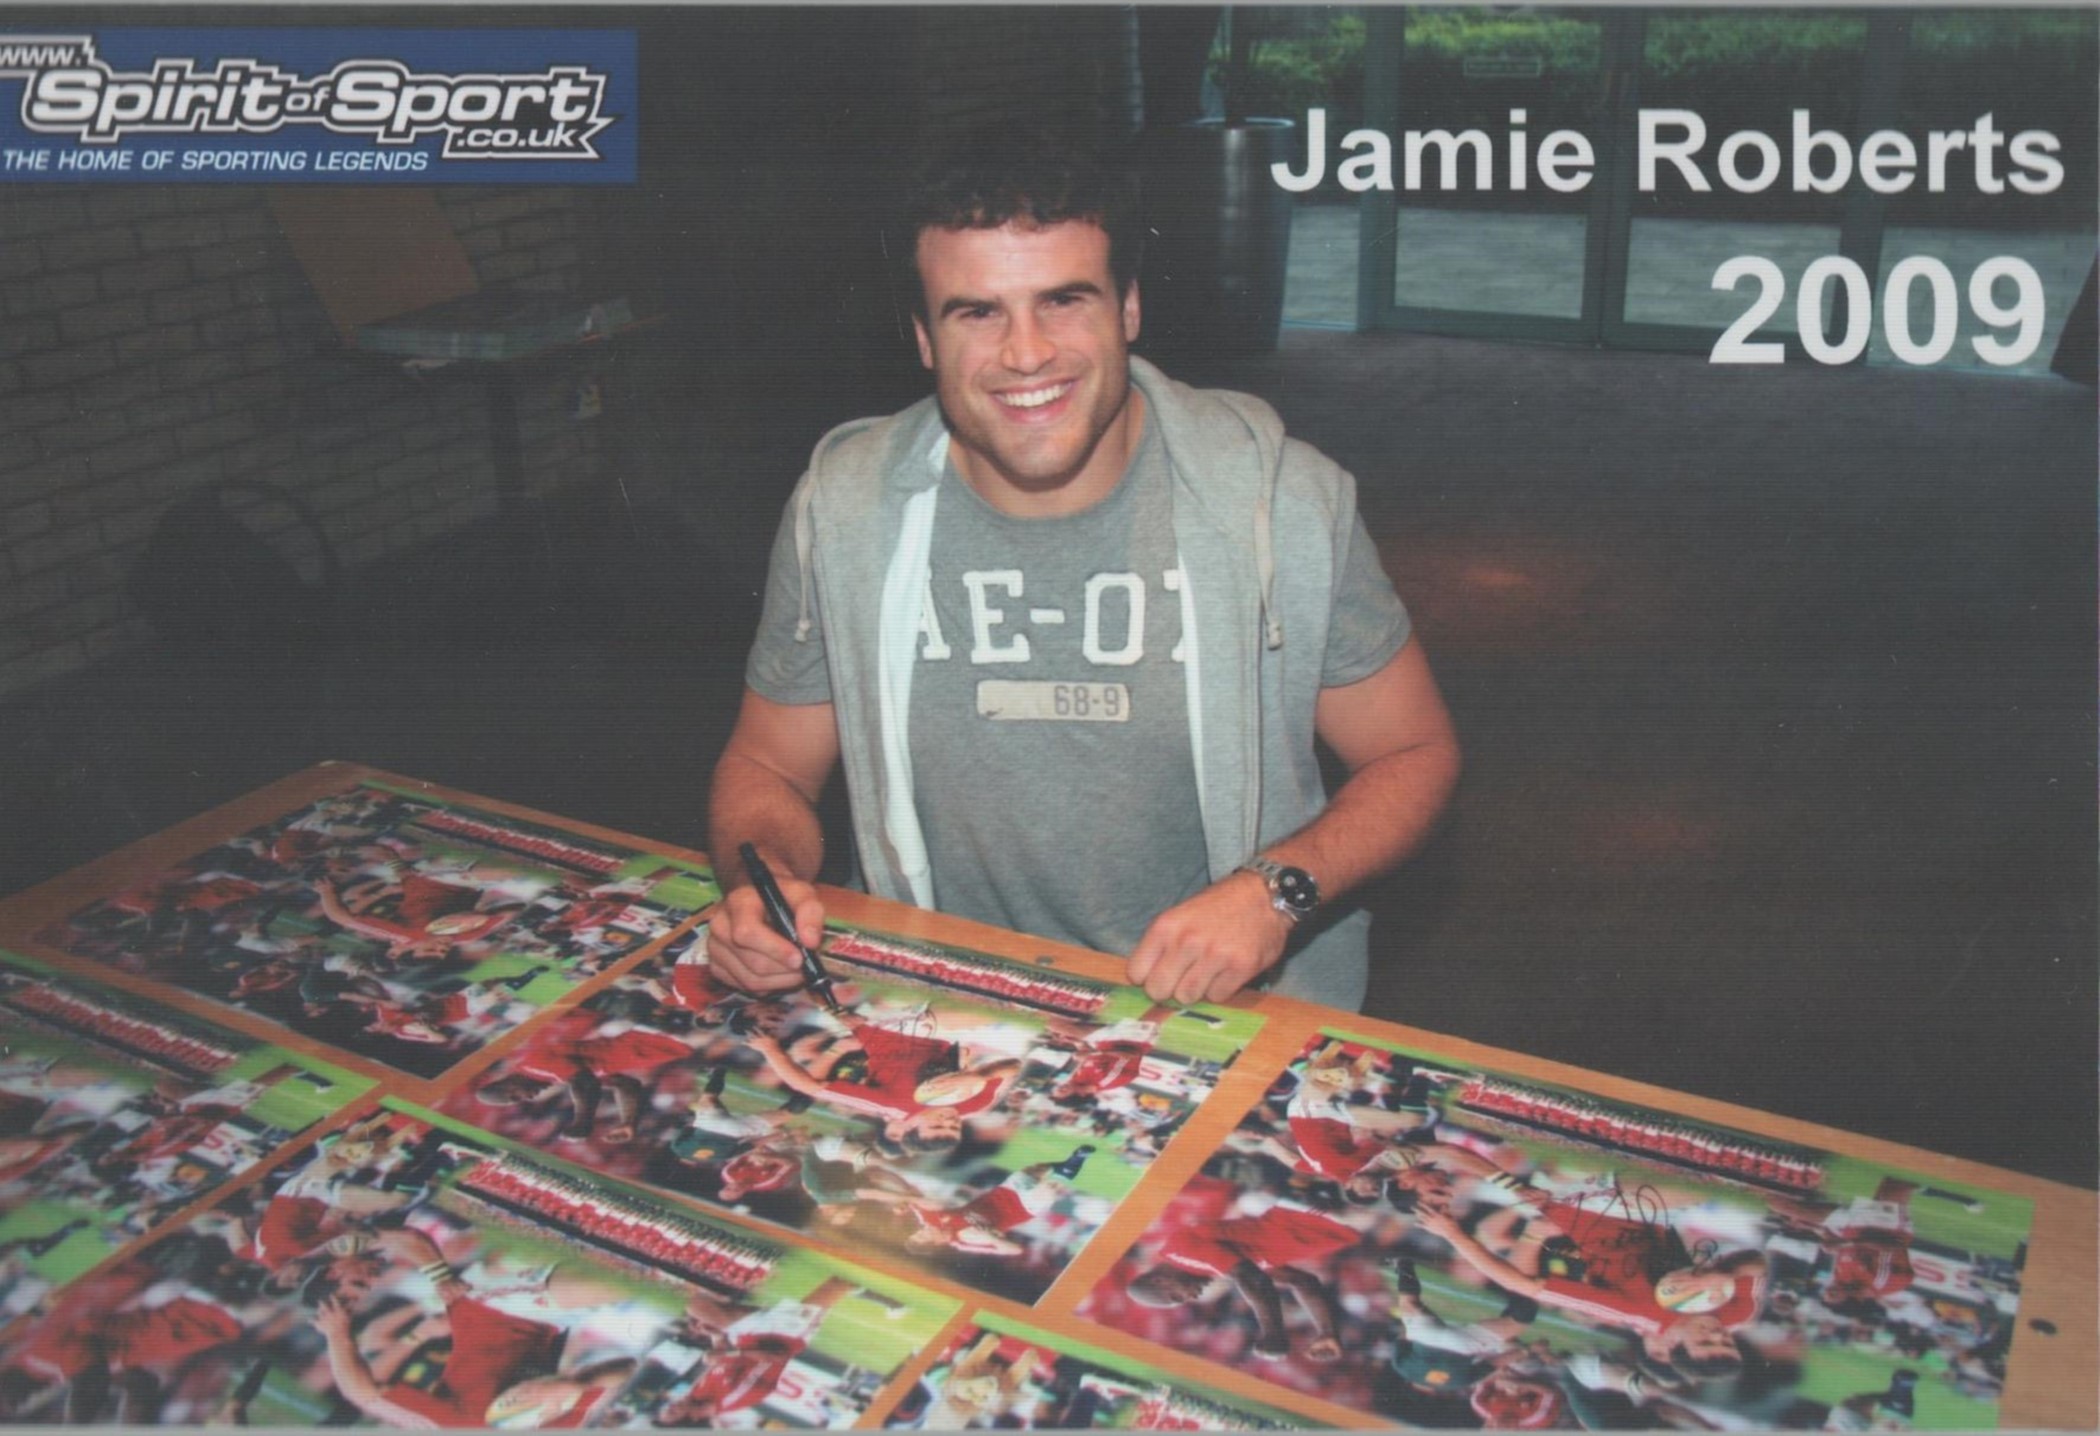 Jamie Roberts - British Lions 2009 limited edition signed photo montage with signing photo For those - Image 2 of 2